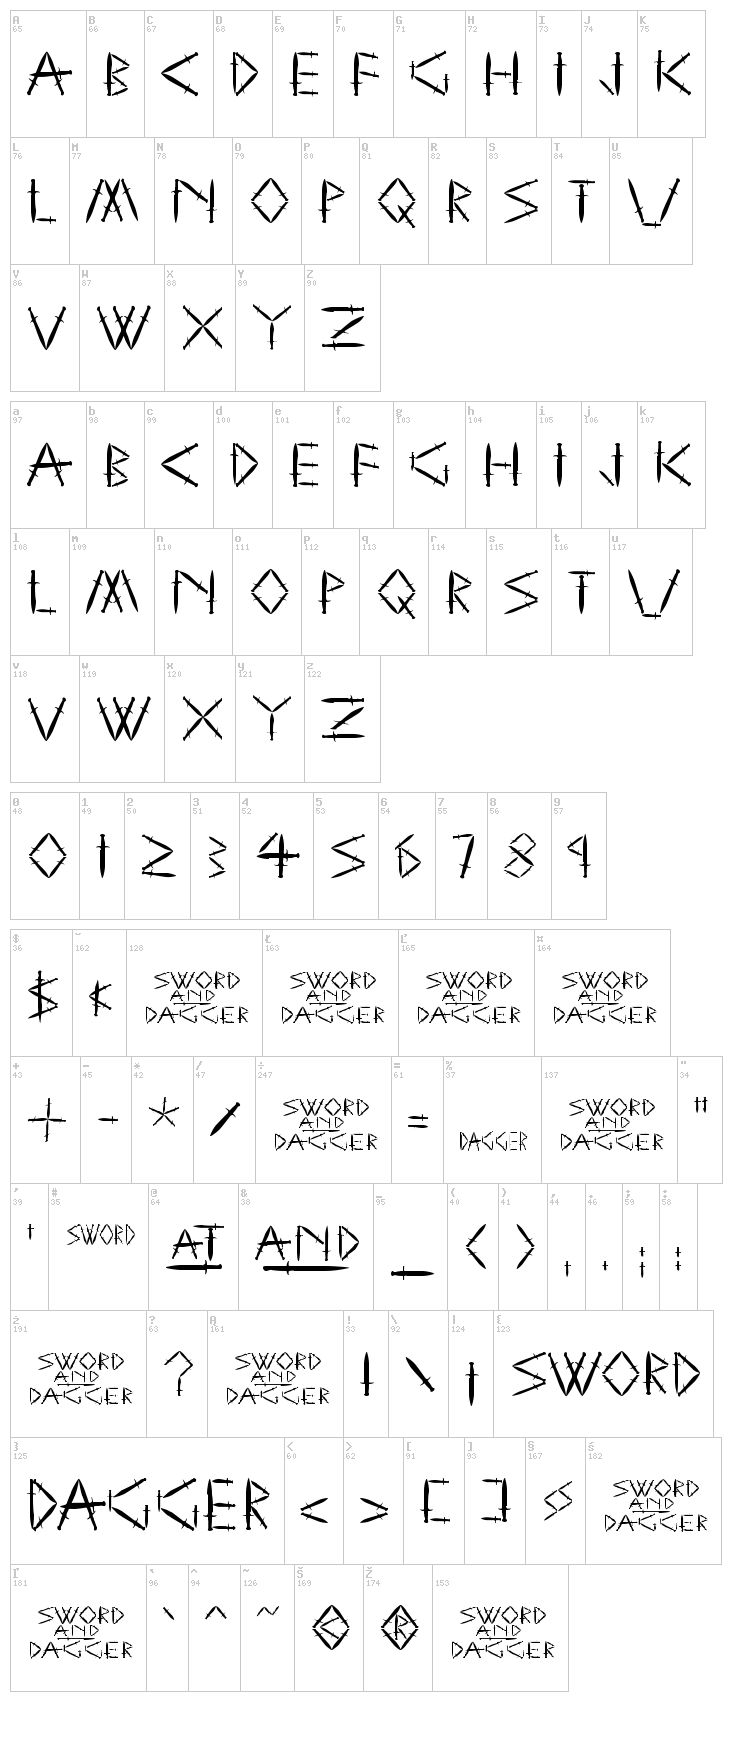 YY Sword and Dagger font map